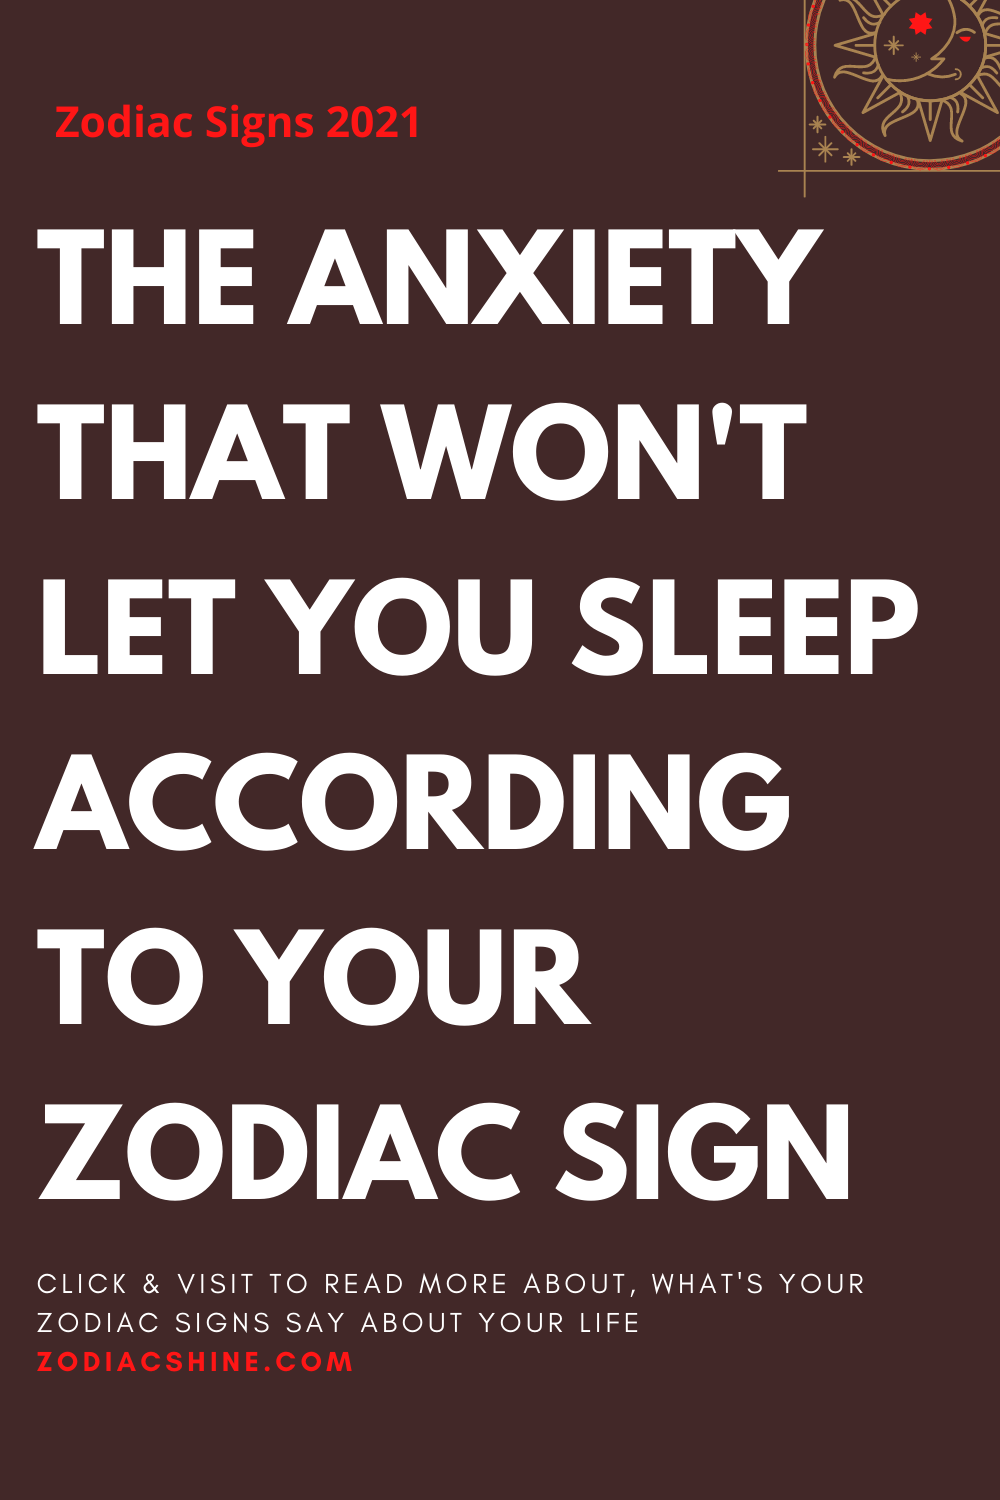 THE ANXIETY THAT WON'T LET YOU SLEEP ACCORDING TO YOUR ZODIAC SIGN